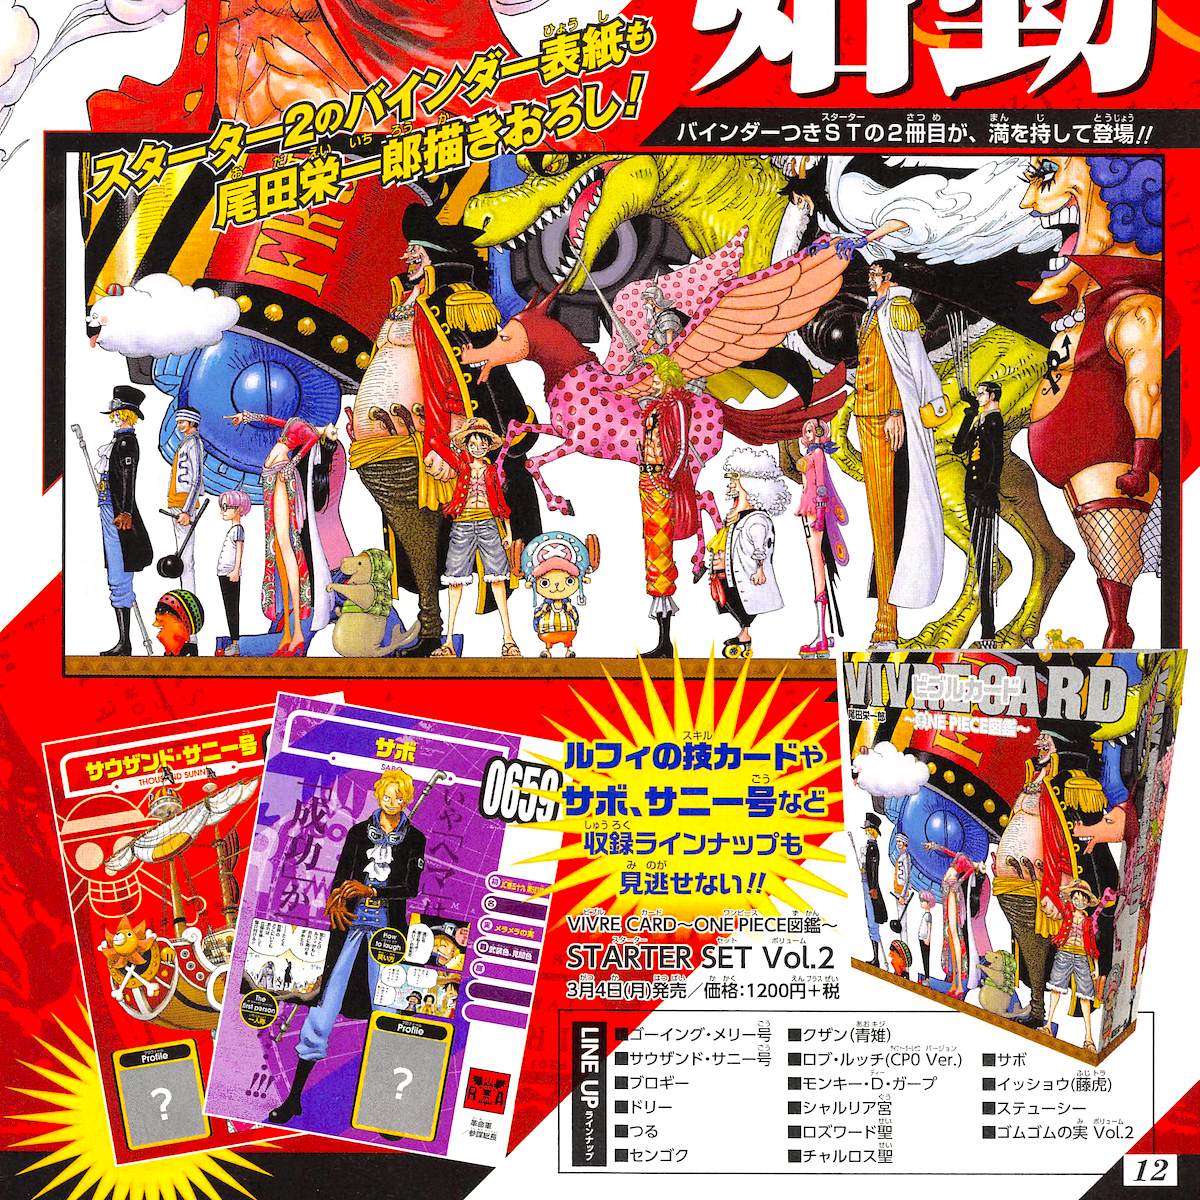 Vivre Card One Piece Visual Dictionary New One Piece Databook On Sale 4th September Page 60